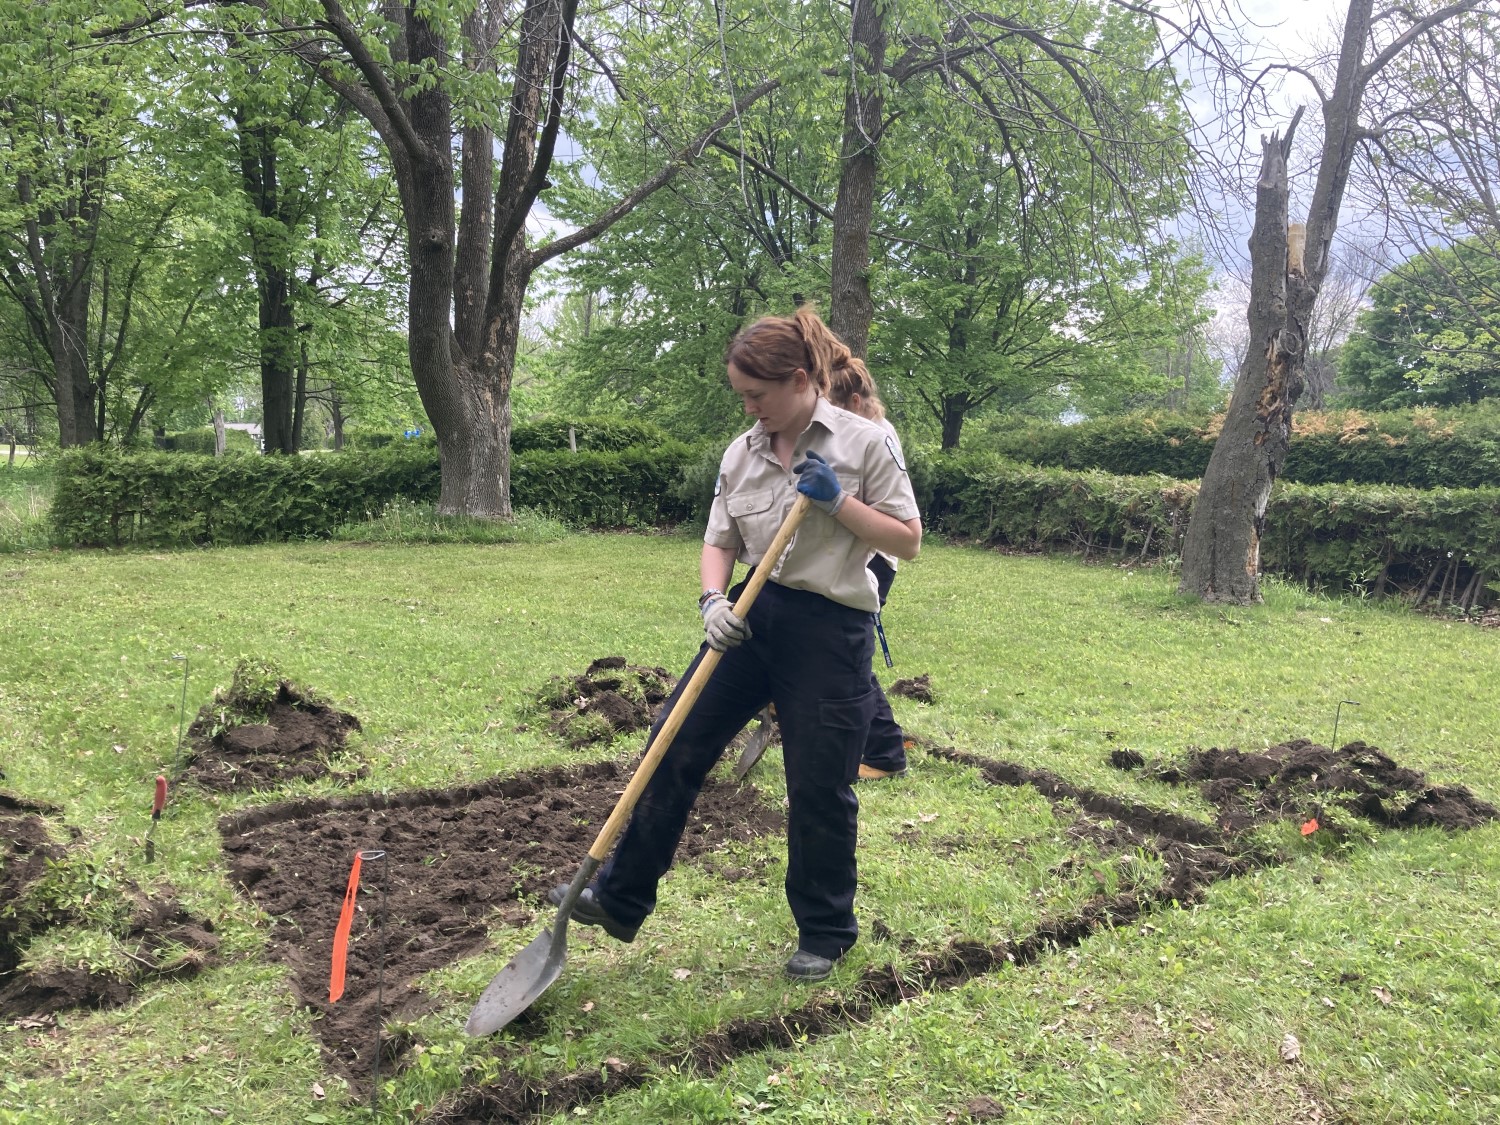 An Ontario Parks staff person using a shovel to pull up grass to make a garden bed.